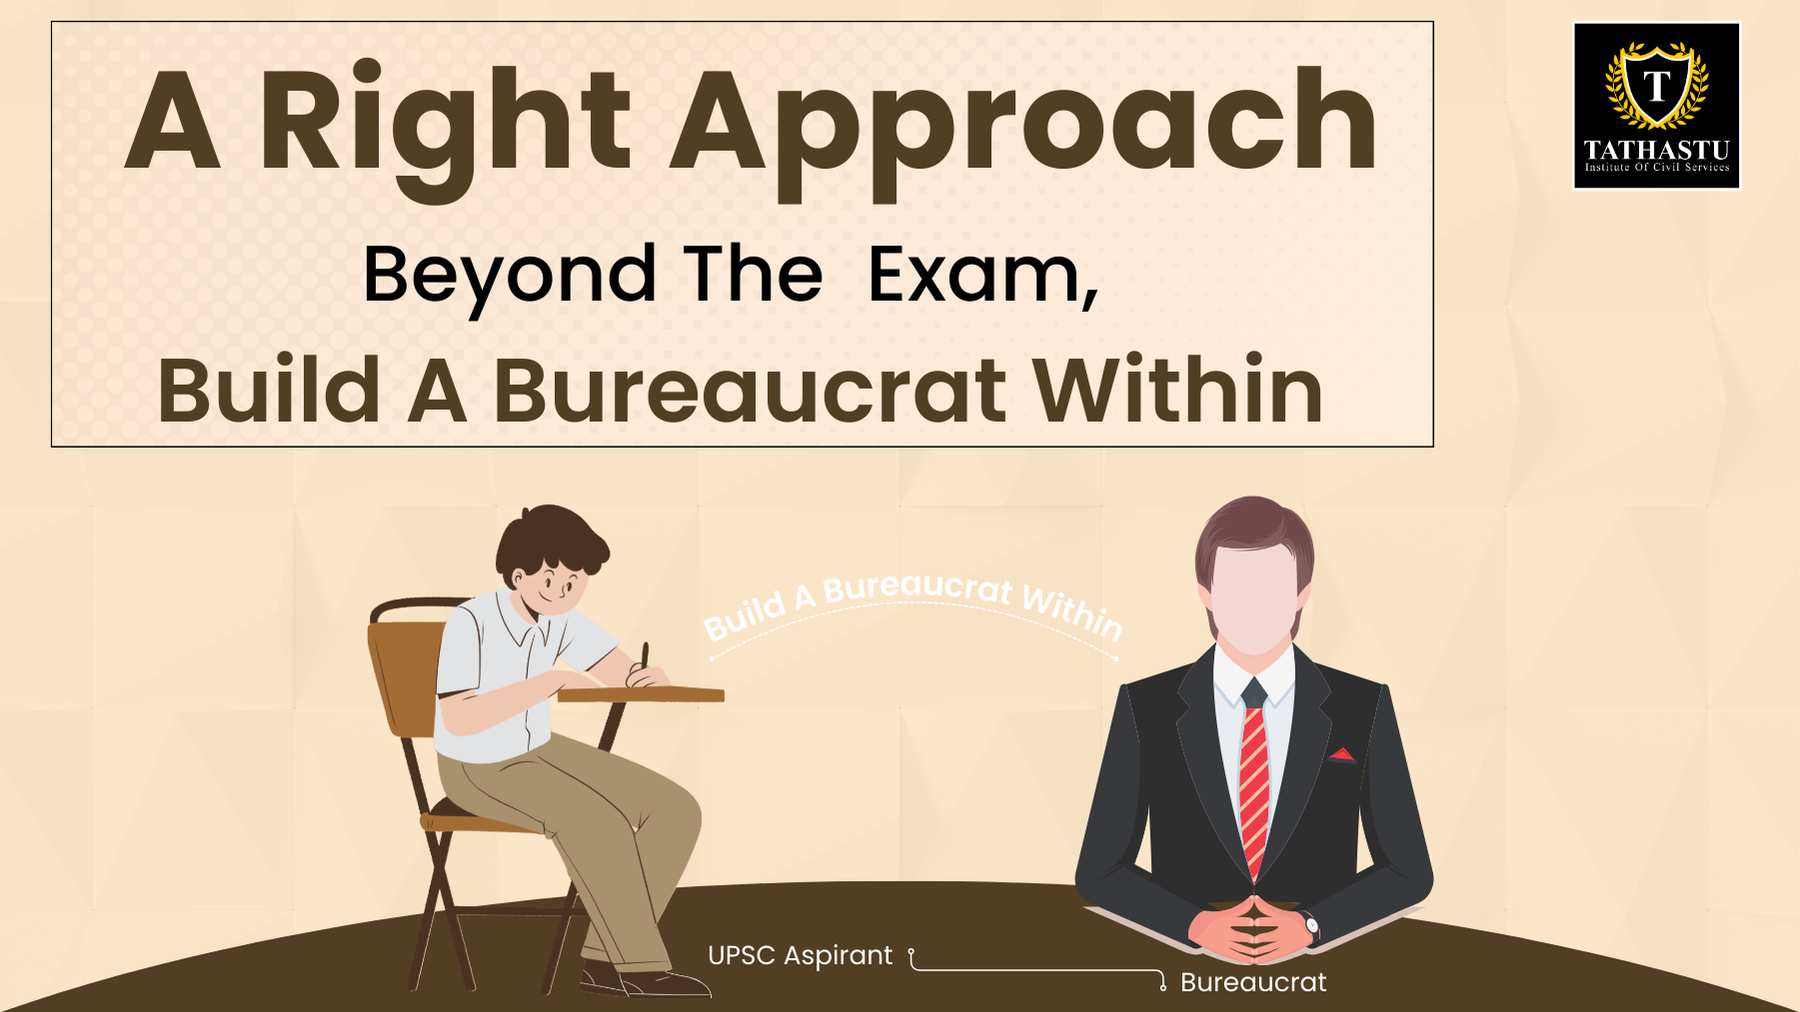 A Right Approach: Beyond The Exam - Build A Bureaucrat Within